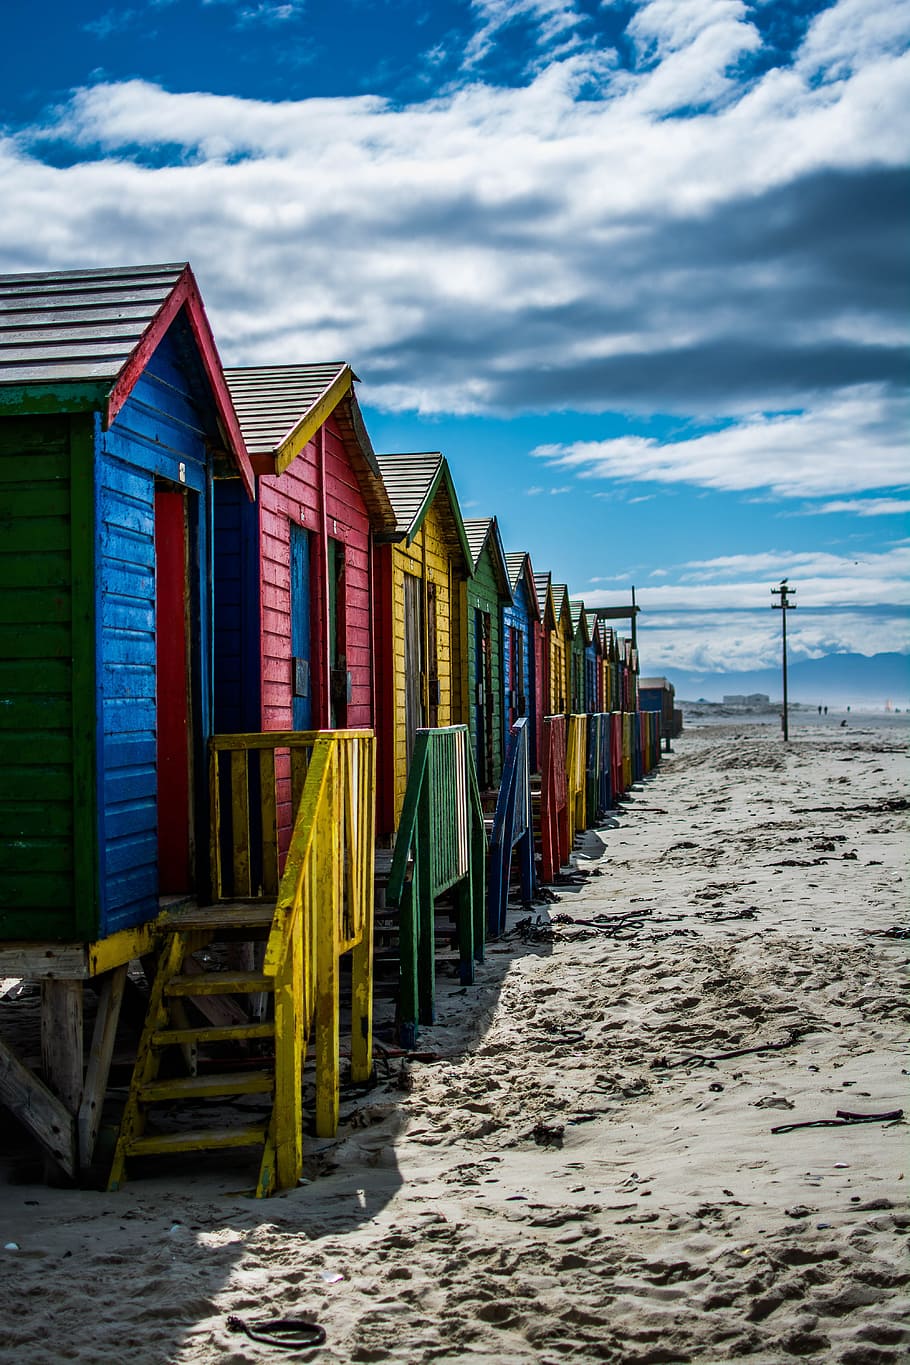 cabin lot, sand, muizenberg, south africa, colorful, cottage, bathhouses, cape town, sand beach, beach